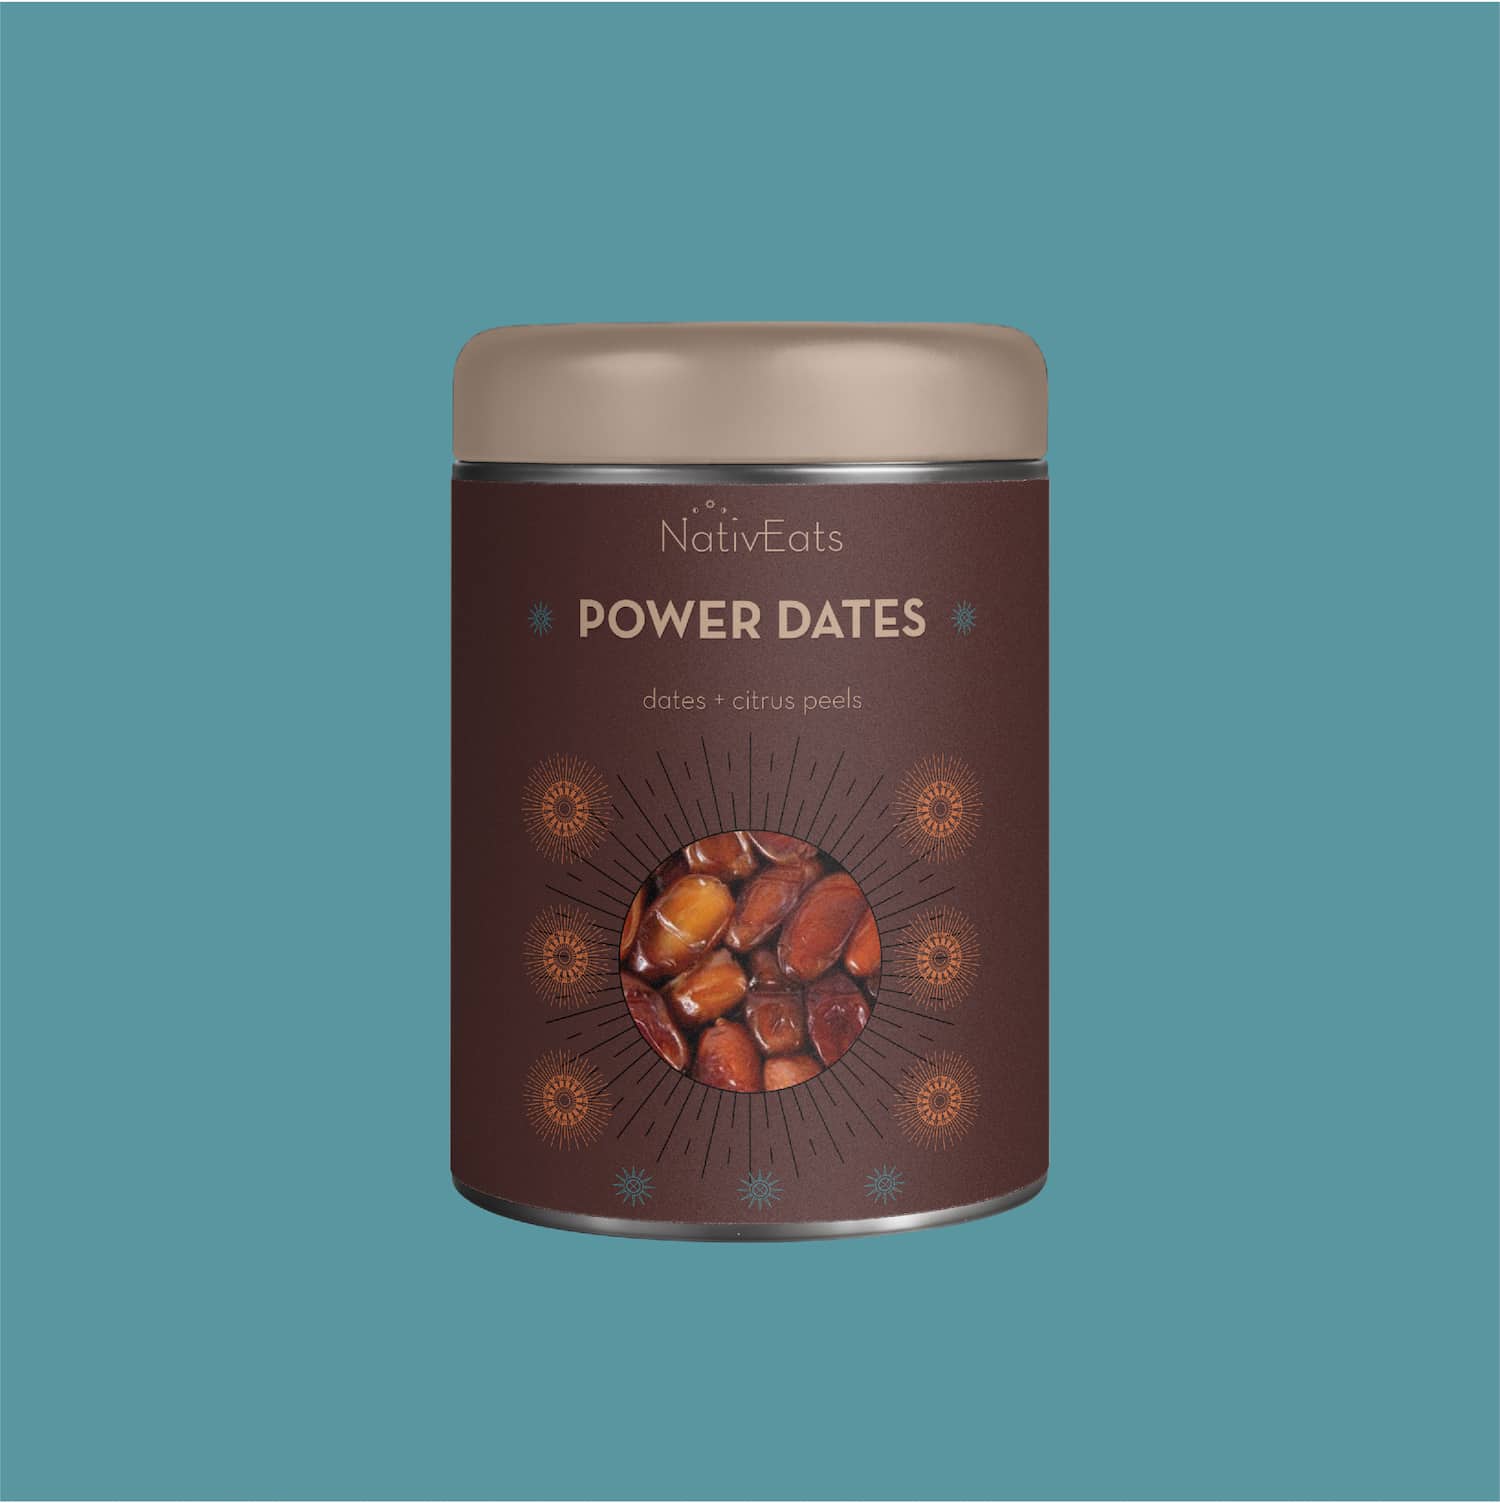 Dates packaging with graphic design in a tin round box